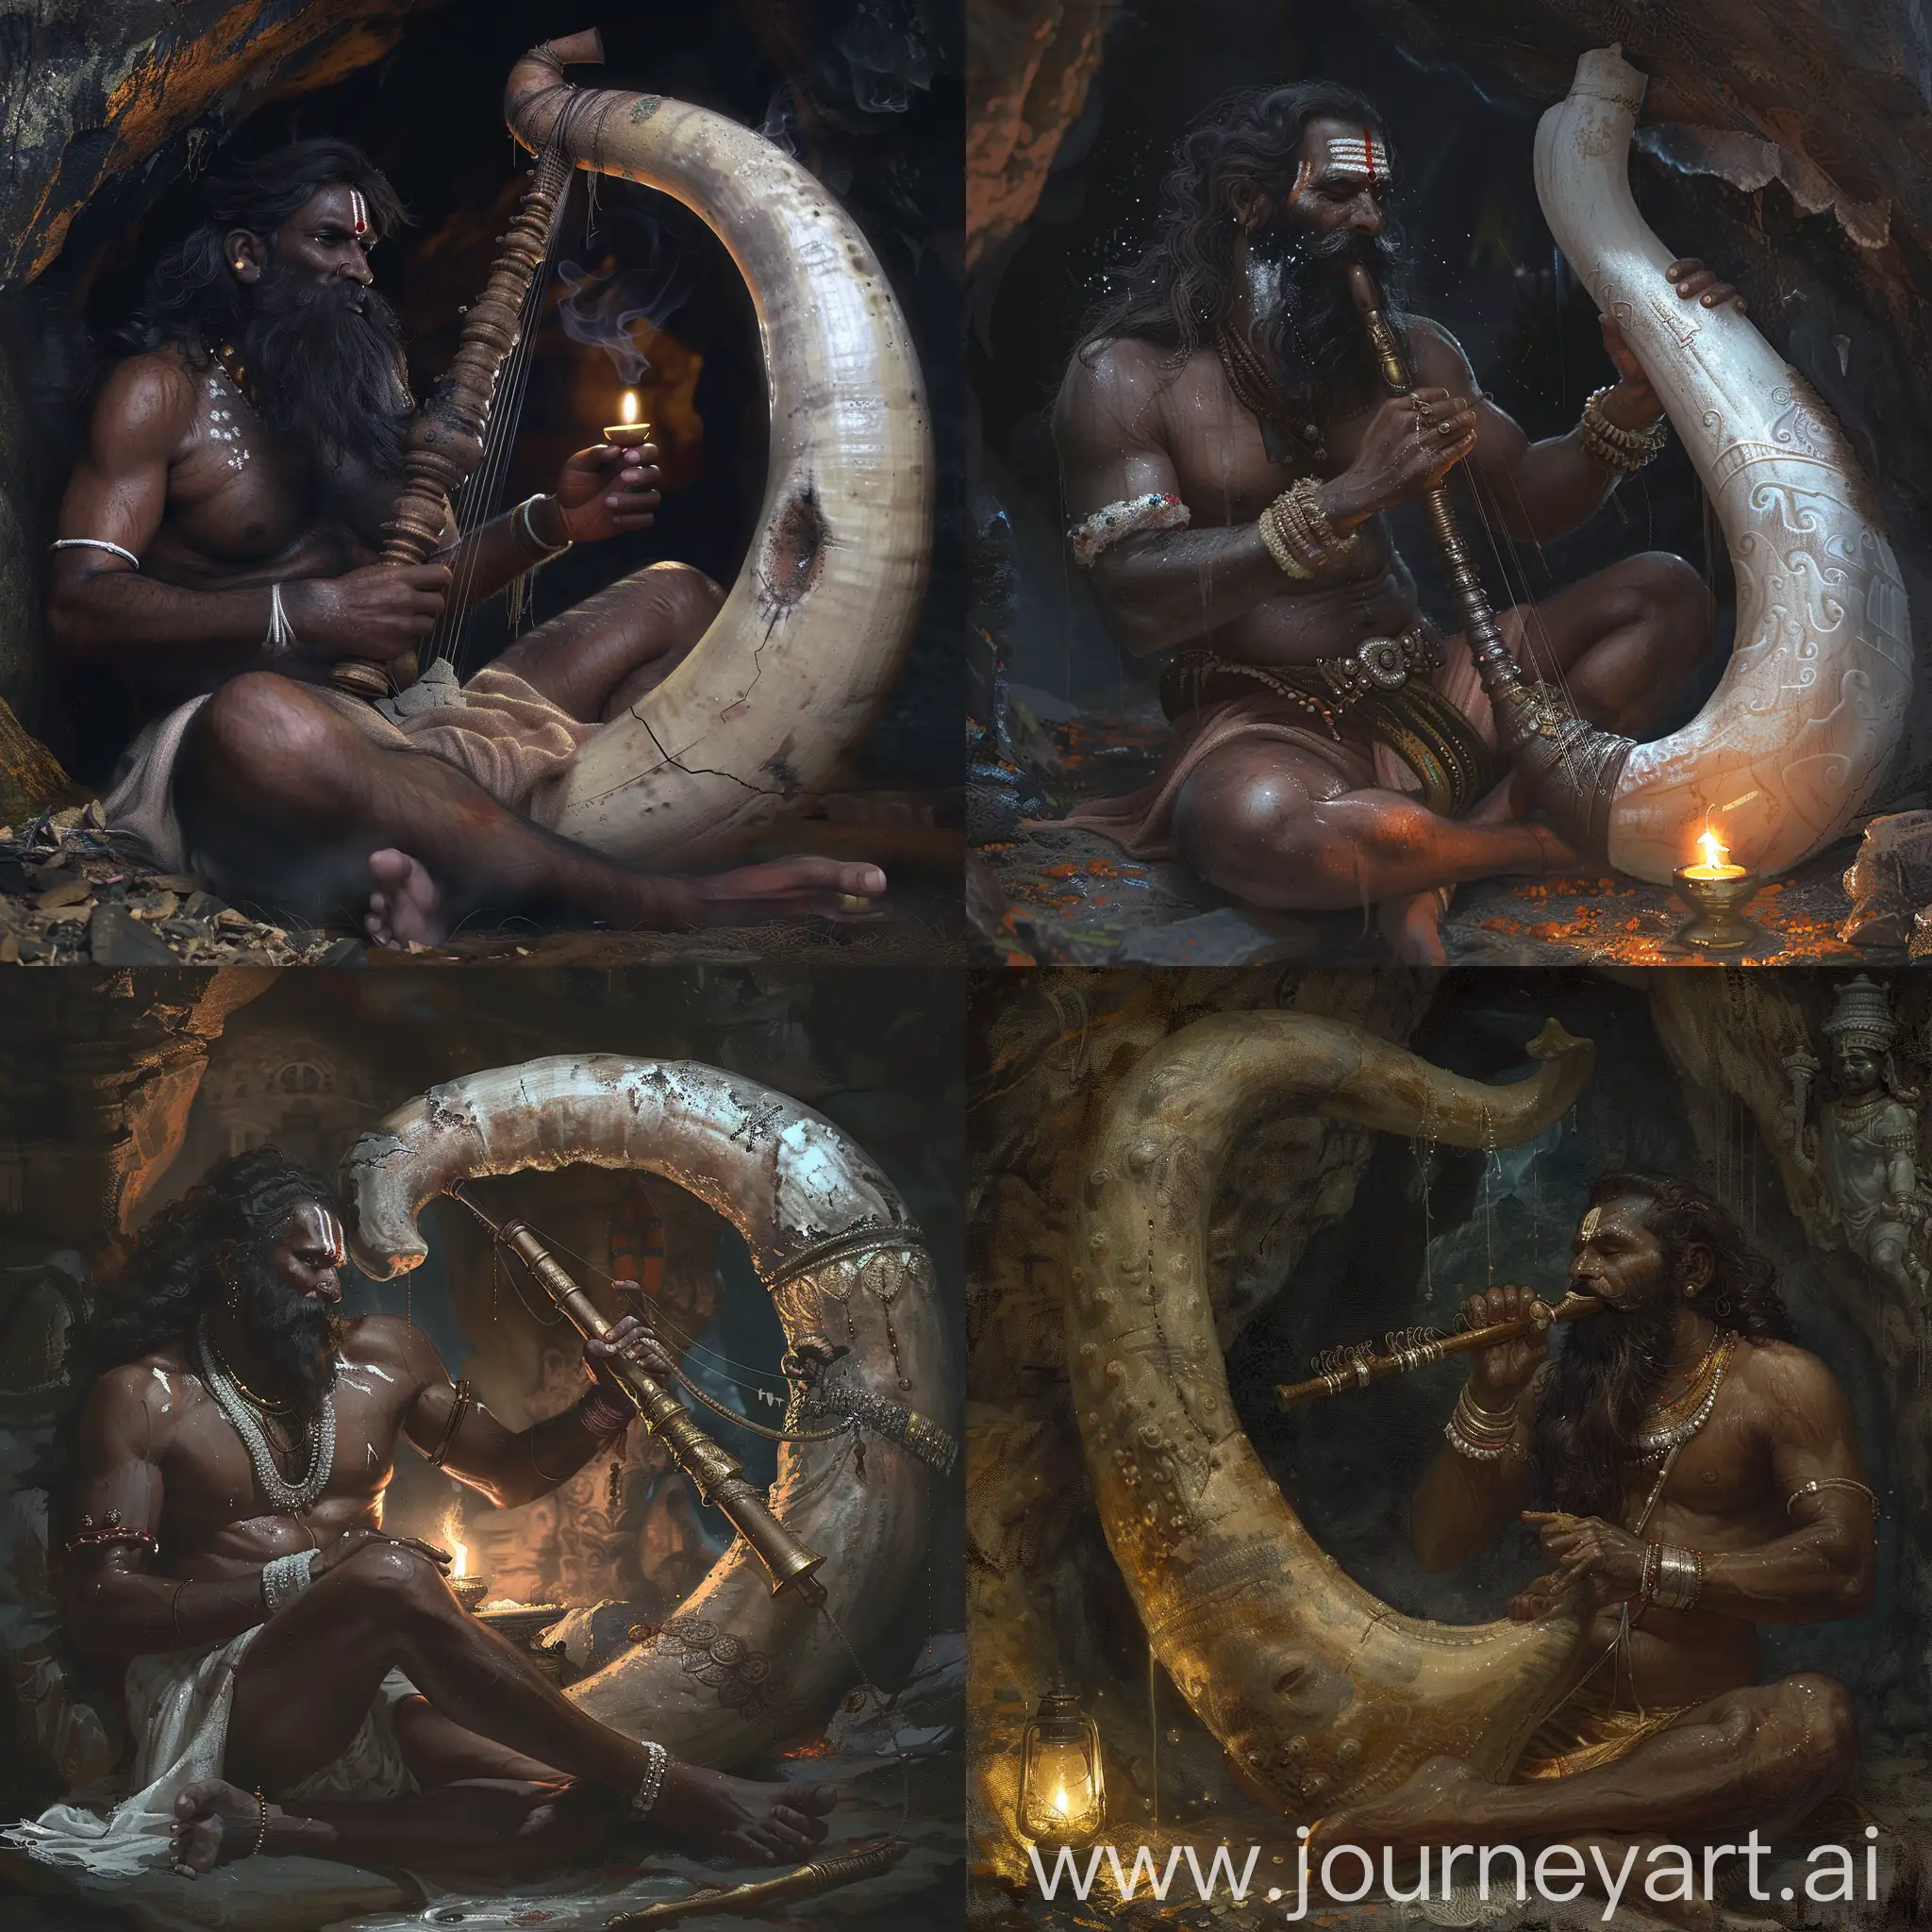 An ancient South Indian man from kasaragod.he is very masculine, dark, handsome, he is sitting in front of a cave temple, it is night, he is playing a mysterious musical instrument in the shape of huge elephant tusk, it has strings and holes, he wore only a very small piece of cloth around his waist, his huge thighs are visible, he have  very long hair, beared and mustache, he have spreaded whte powder on forehead, he have a scar on his right eye, he wore silver ornaments including a nose ring, there is only a oil lamp and he is visible in that light